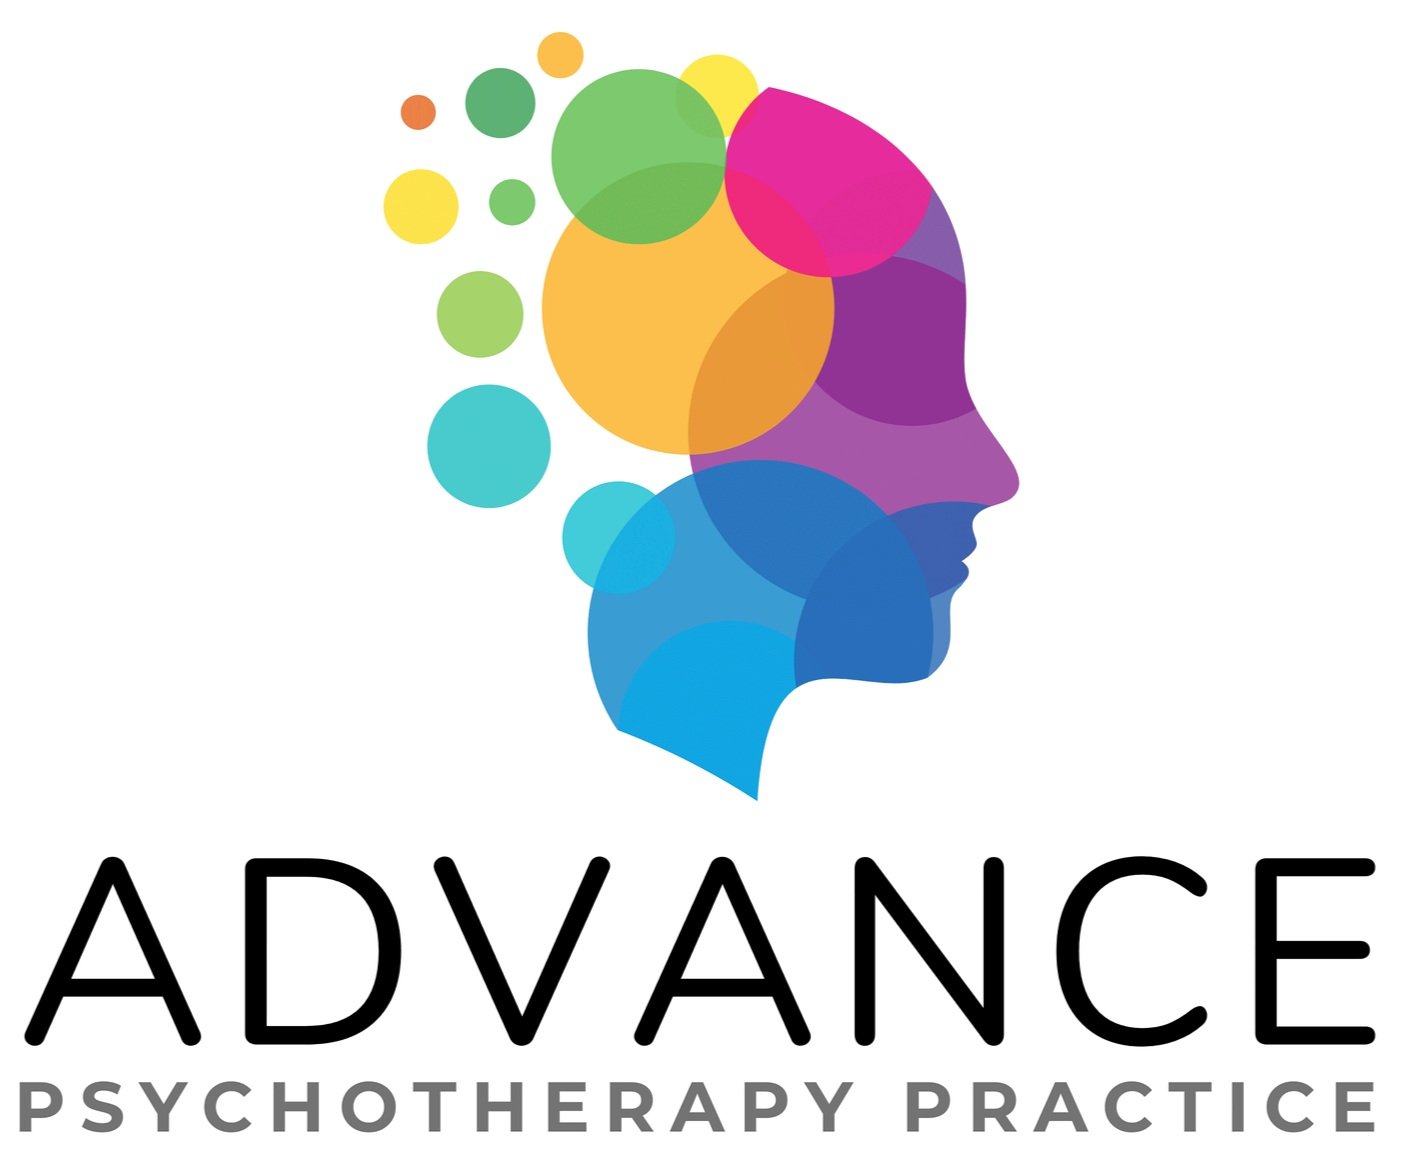 Advance Psychotherapy Practice